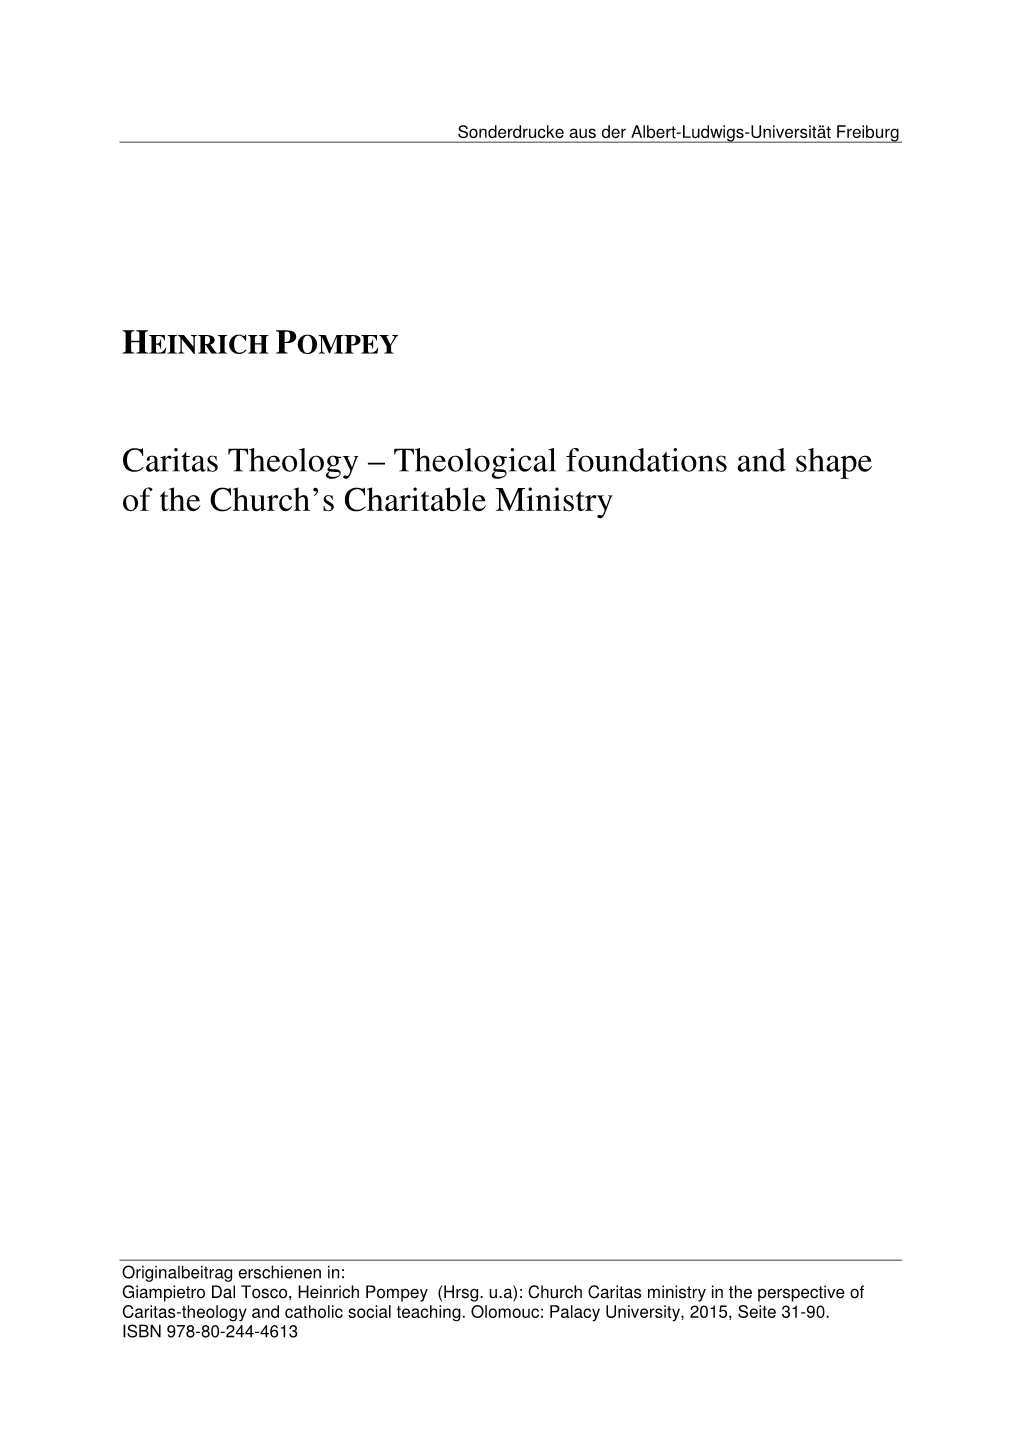 Caritas Theology – Theological Foundations and Shape of the Church’S Charitable Ministry